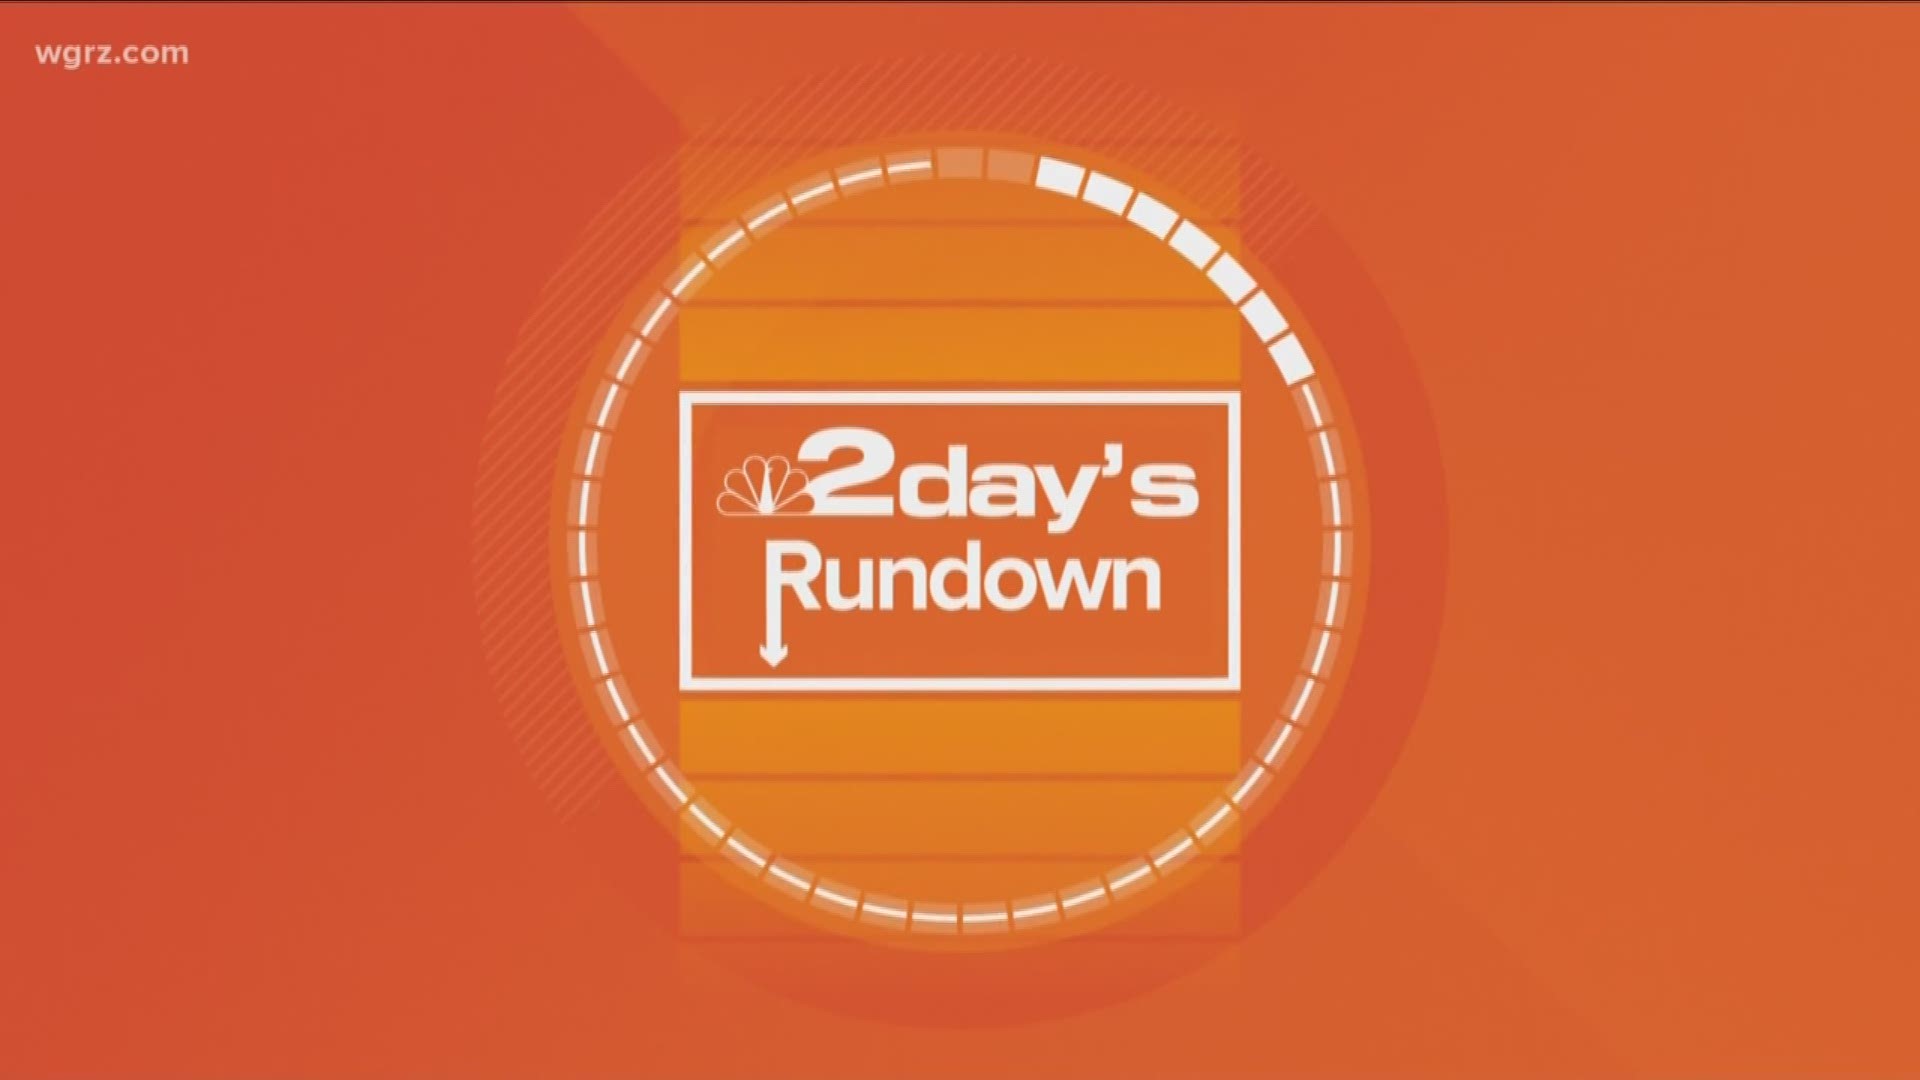 2day's Rundown looks at the the day's top stories for 08/14/18